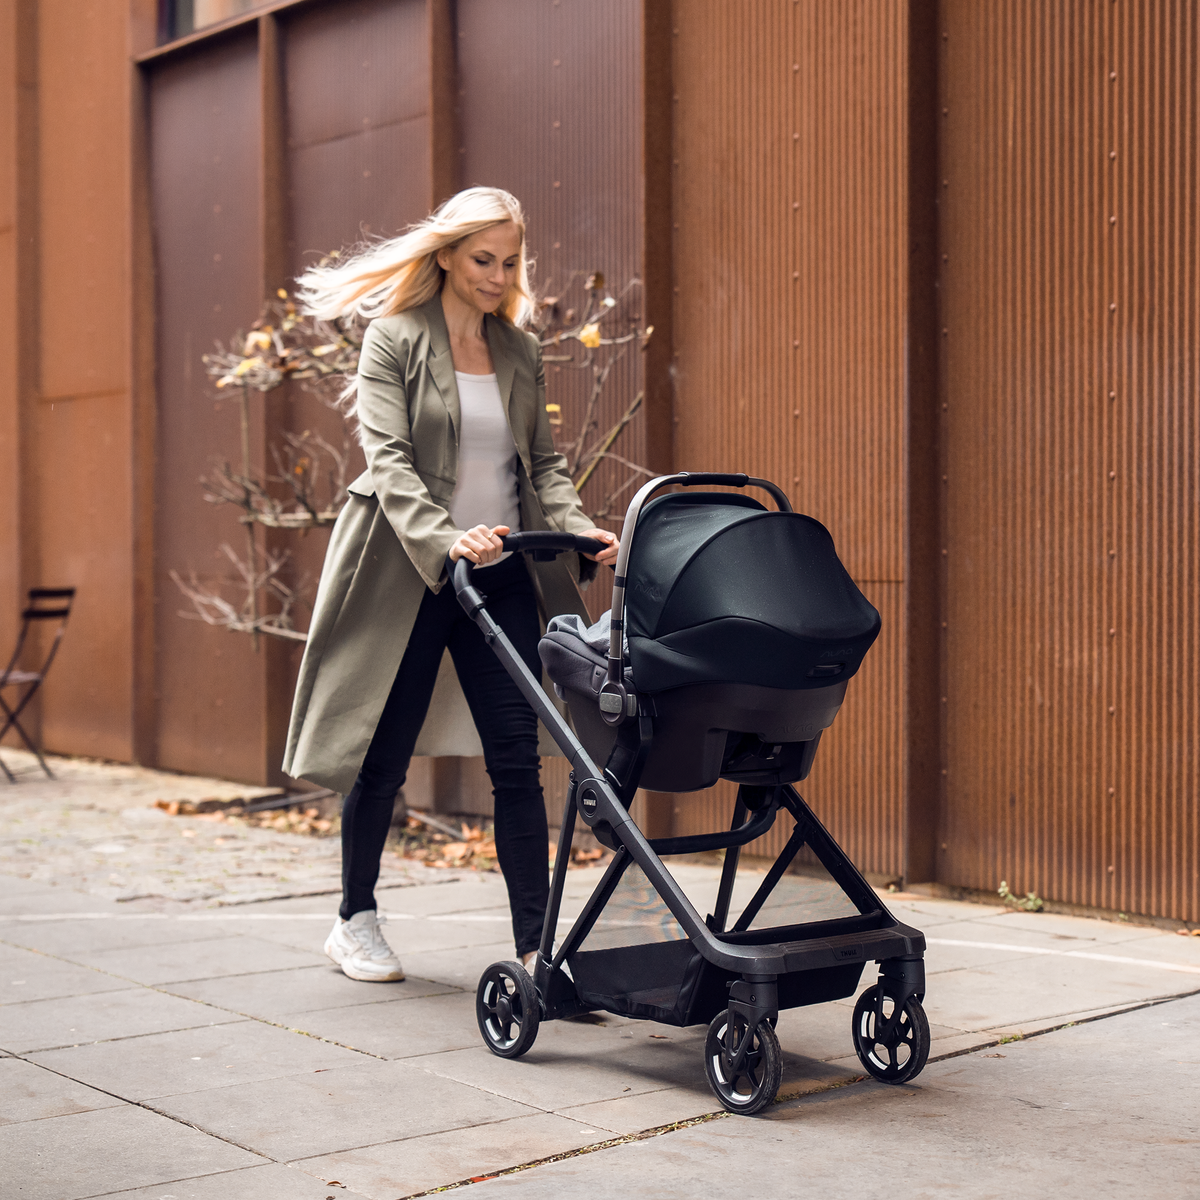 A woman walks down a street with her baby in a stroller with a car seat using the Thule Shine Car Seat Adapter.